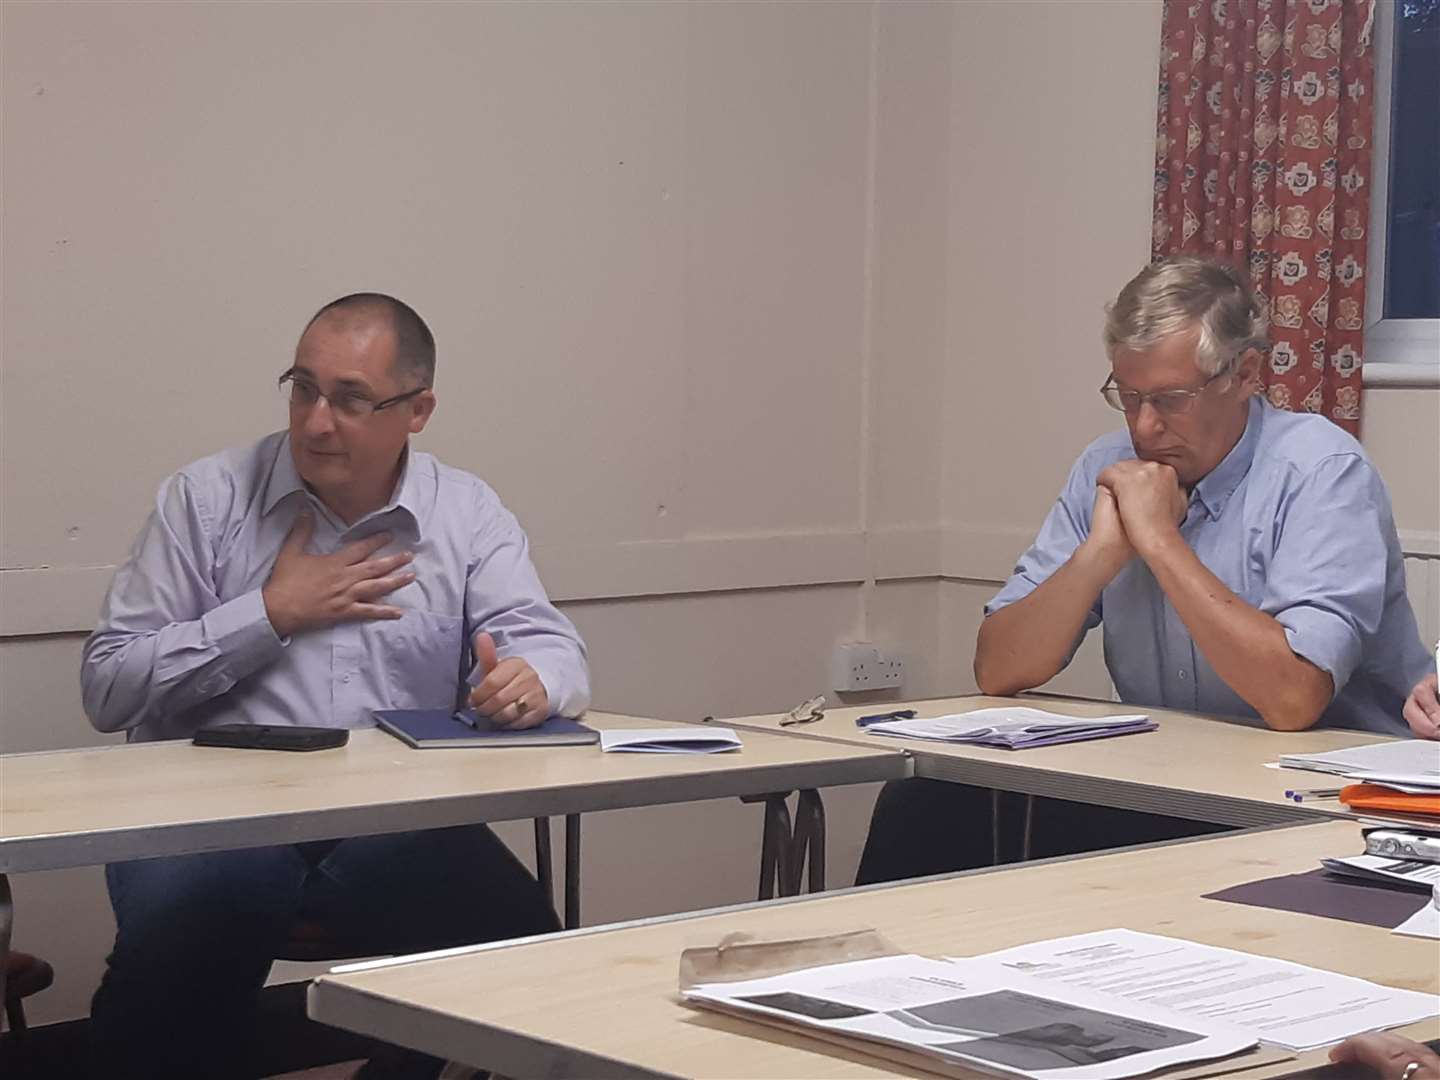 Cllrs Lawrence Rustem and Geoff Cosgrove hadn't net until the meeting